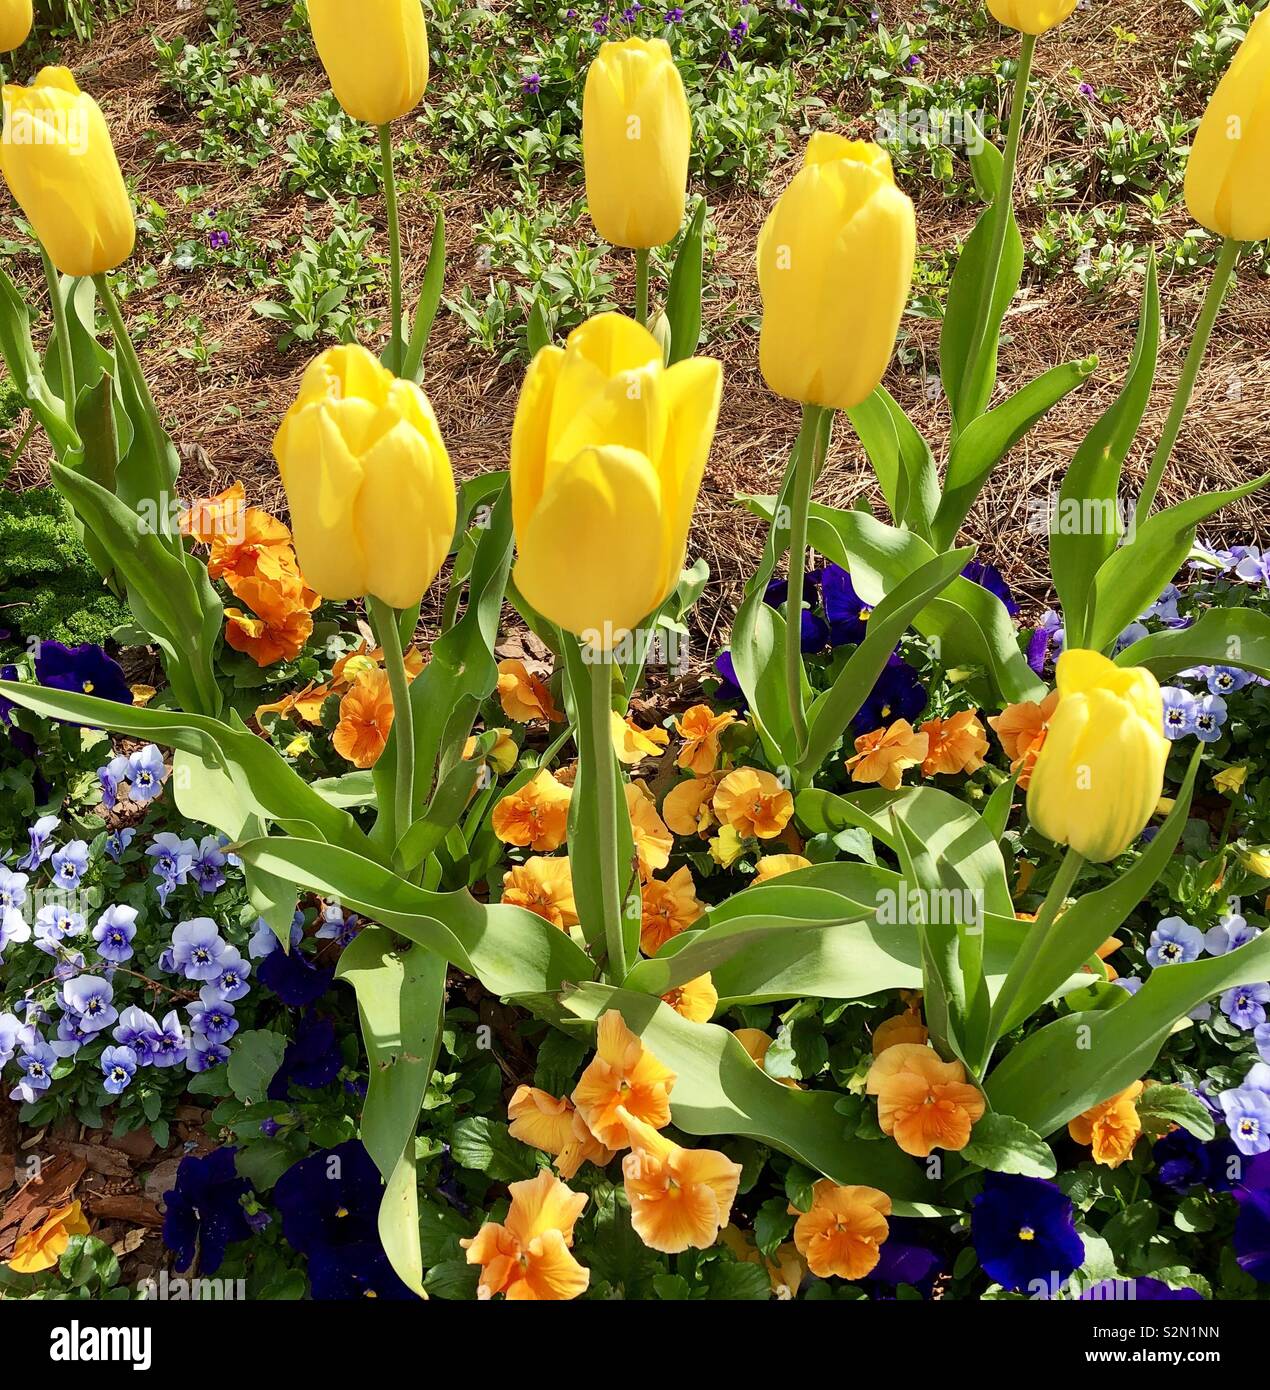 Bright yellow tulips blooming in a pansy garden Stock Photo